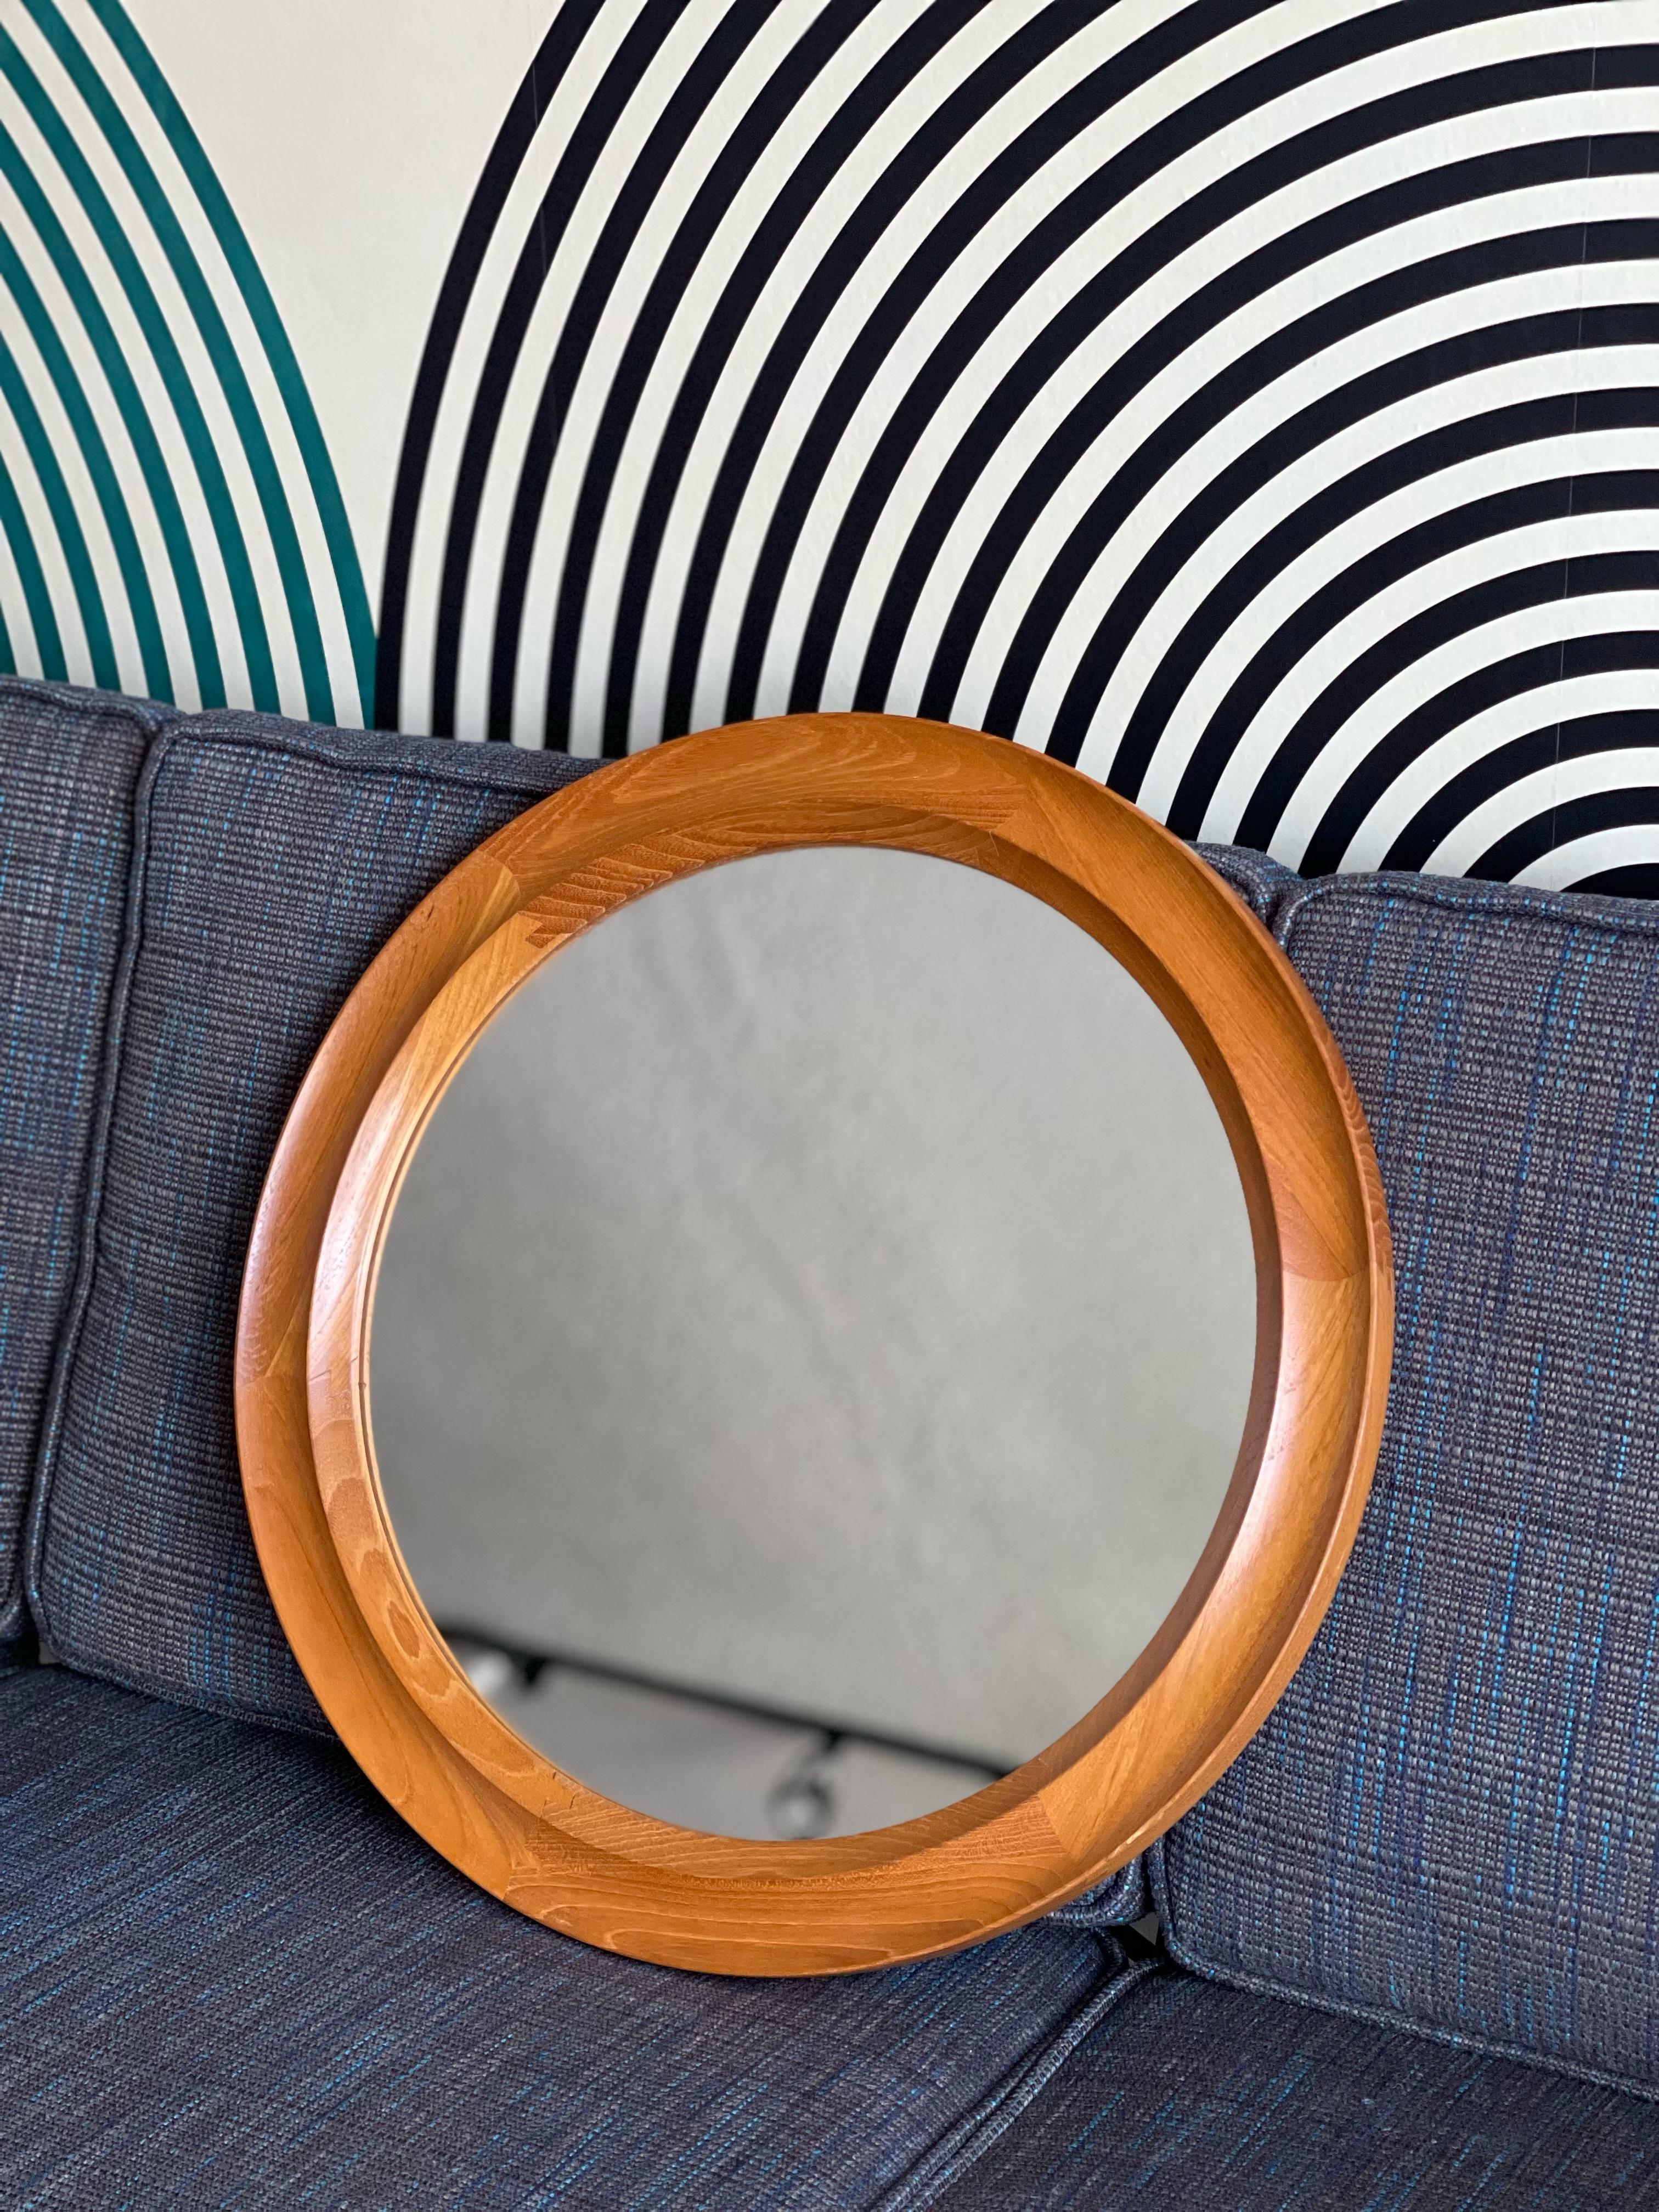 This Danish teak mirror is by Pedersen & Hansen.
c. 1960. 
It's in good vintage condition with some wear on the teak frame consistent with age and use.